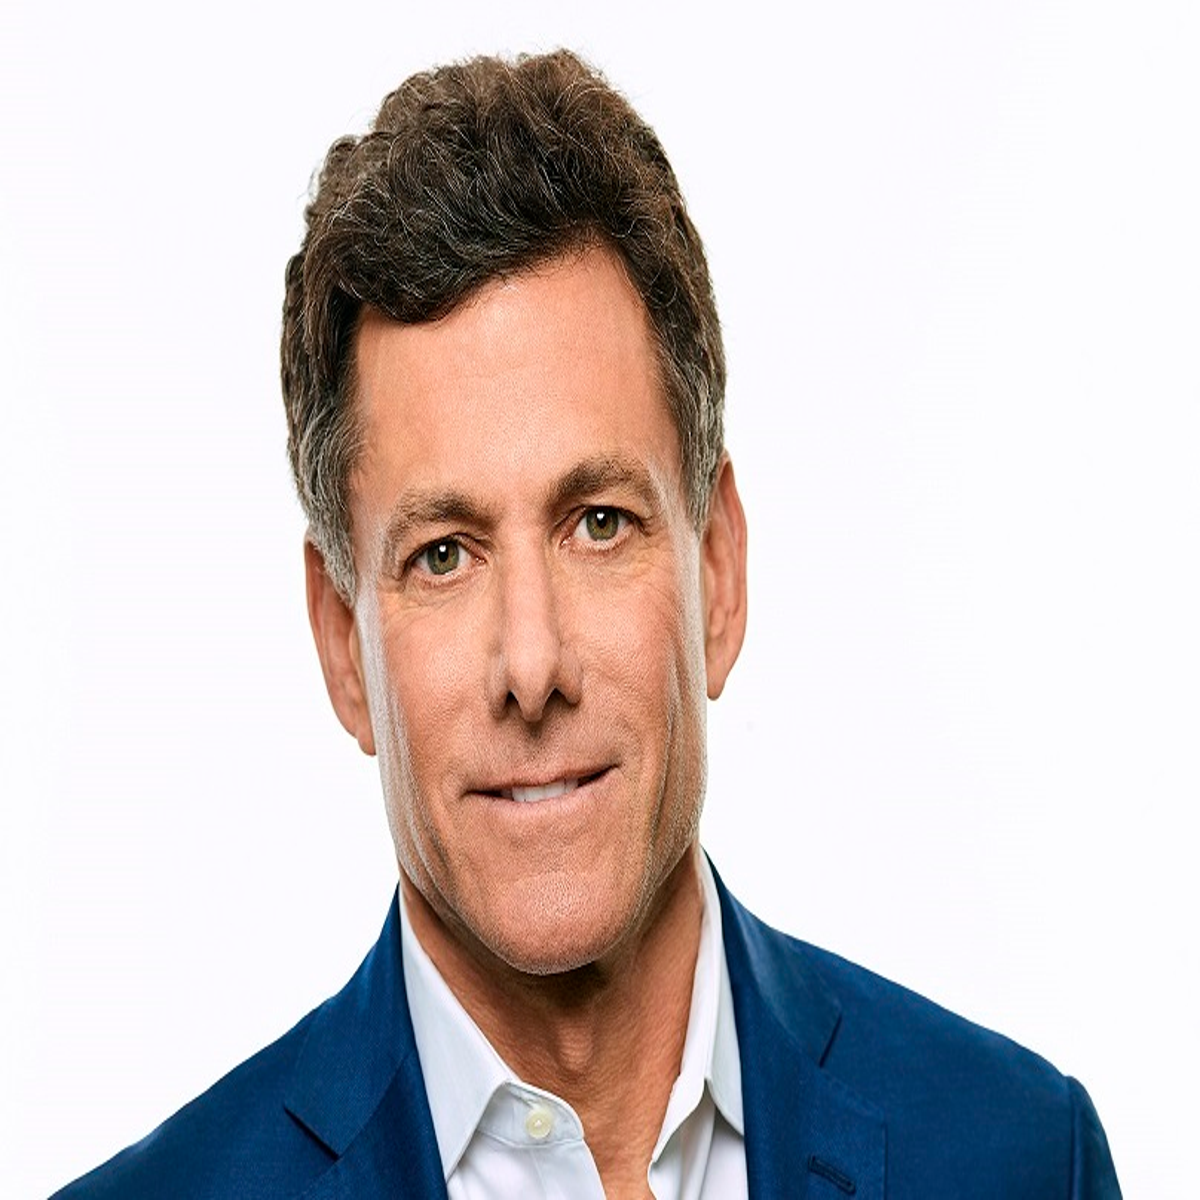 Take-Two Interactive CEO Strauss Zelnick commented in a recent